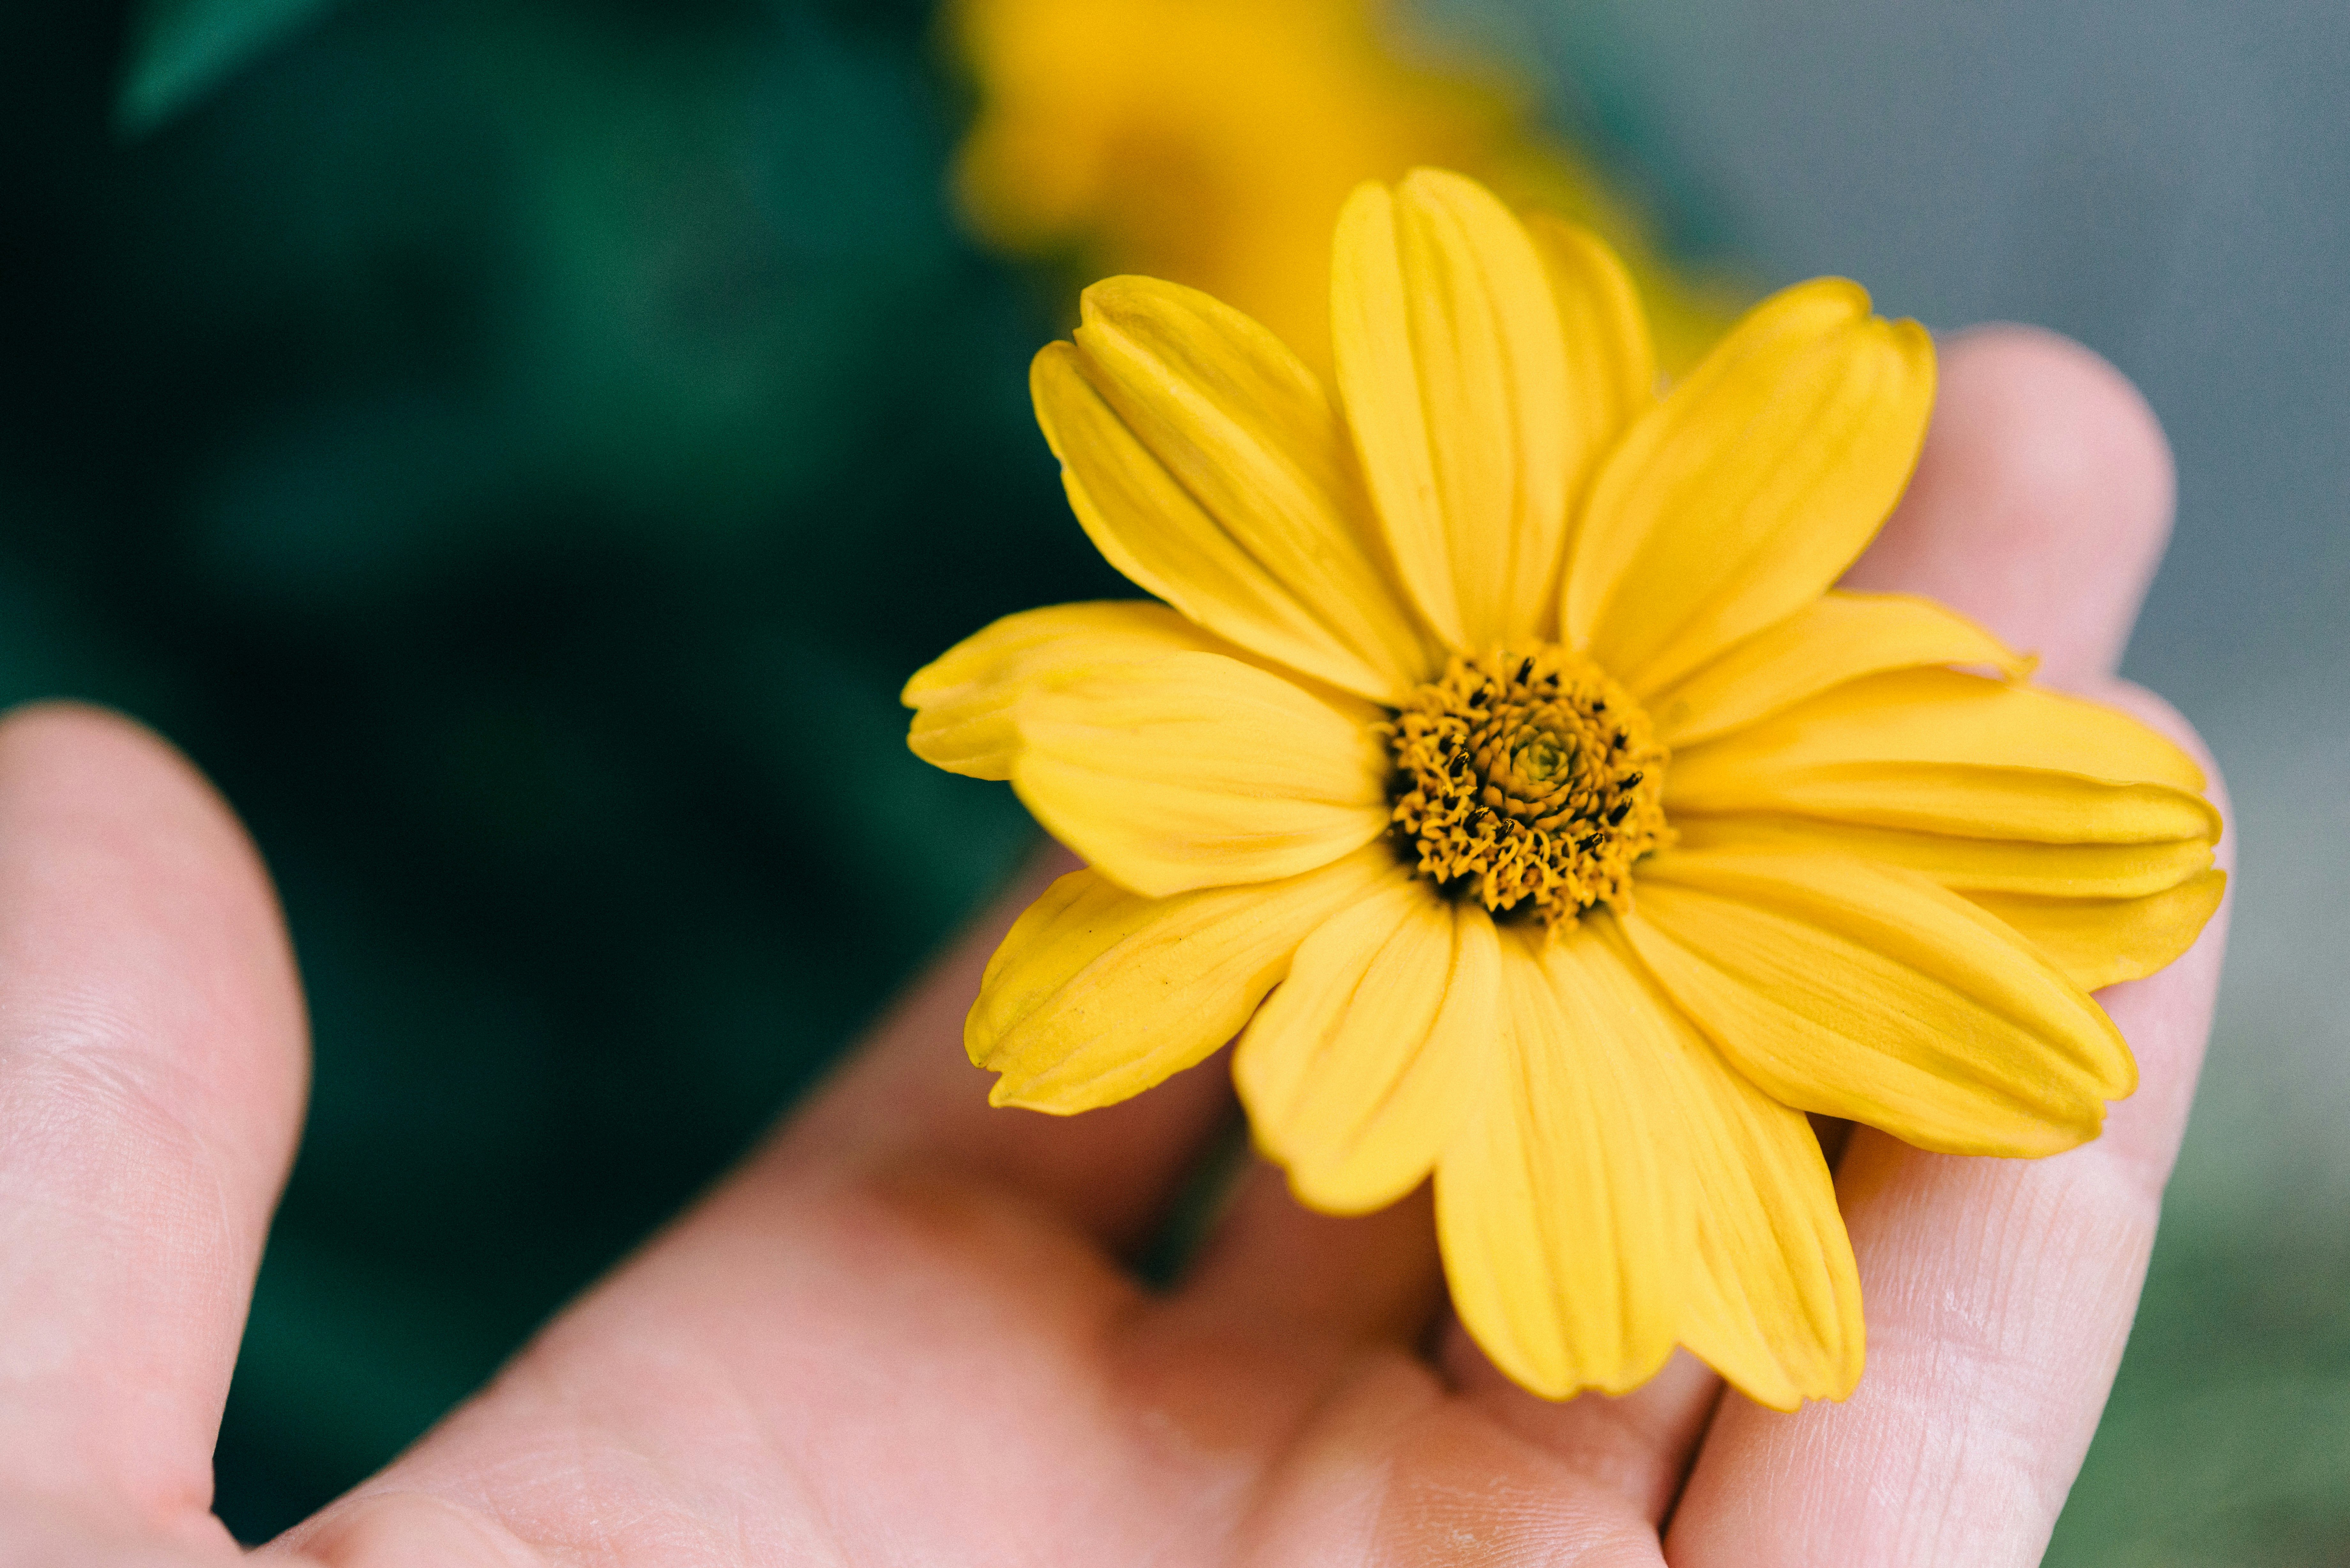 person holding yellow daisy flower